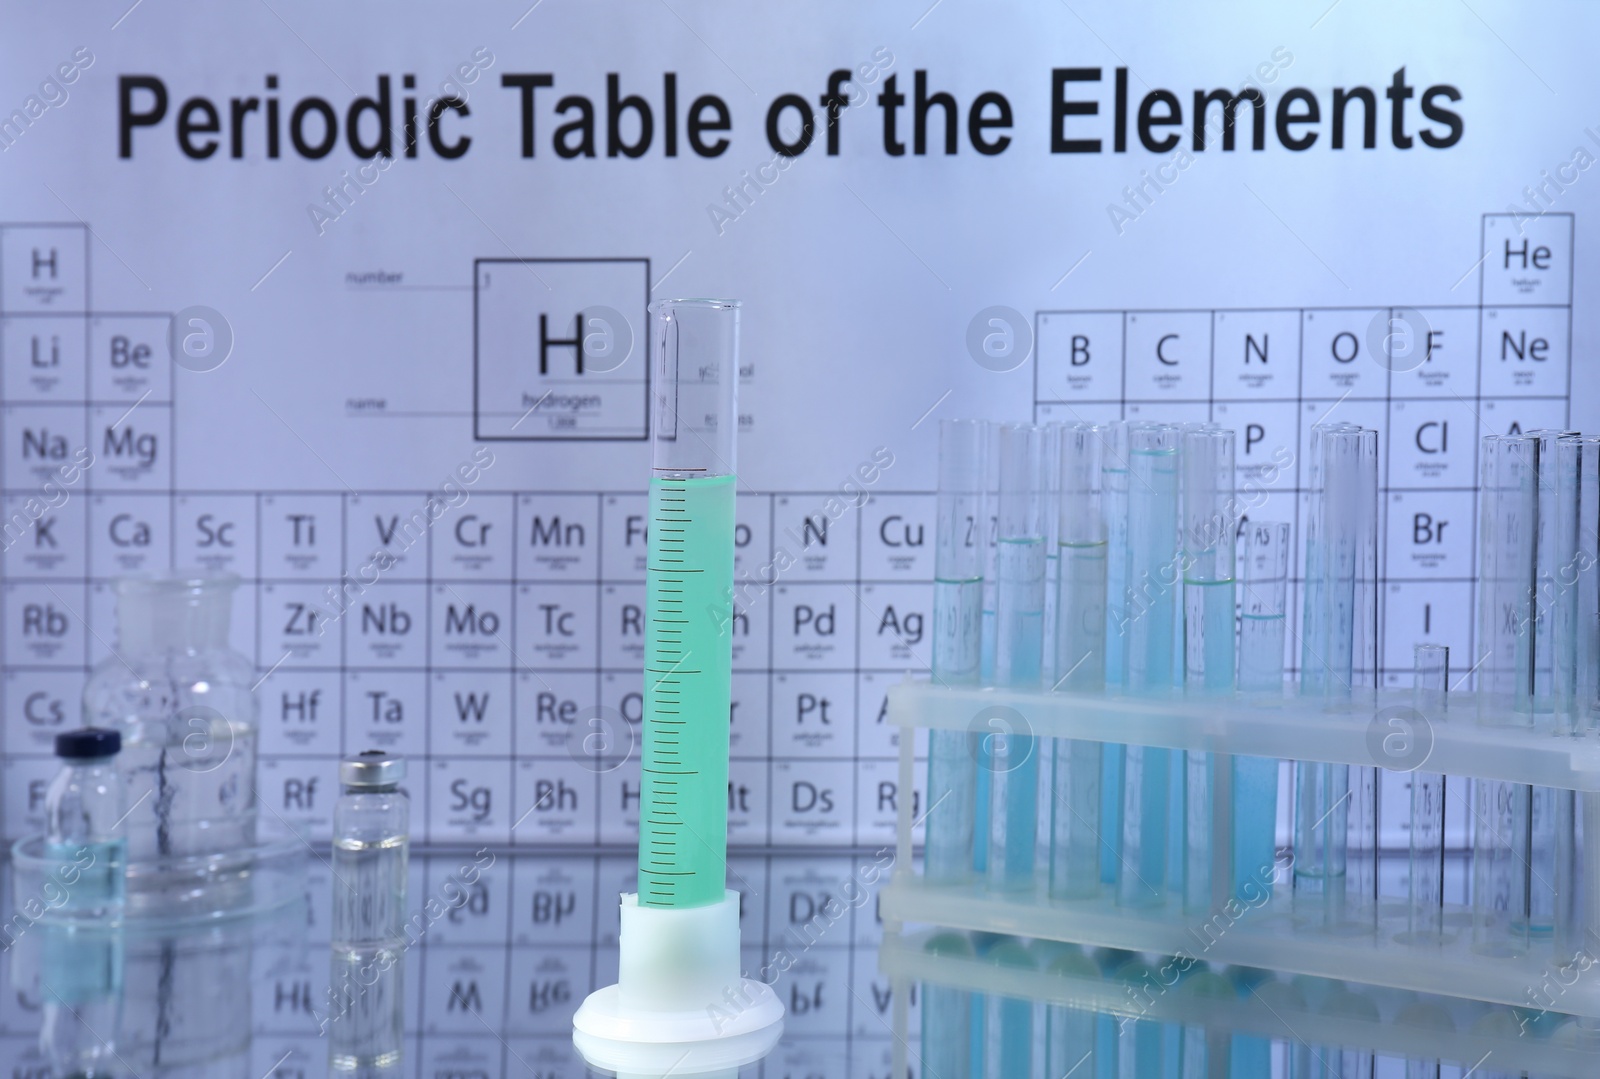 Photo of Graduated cylinder, bottles and test tubes in rack on mirror surface against periodic table of chemical elements